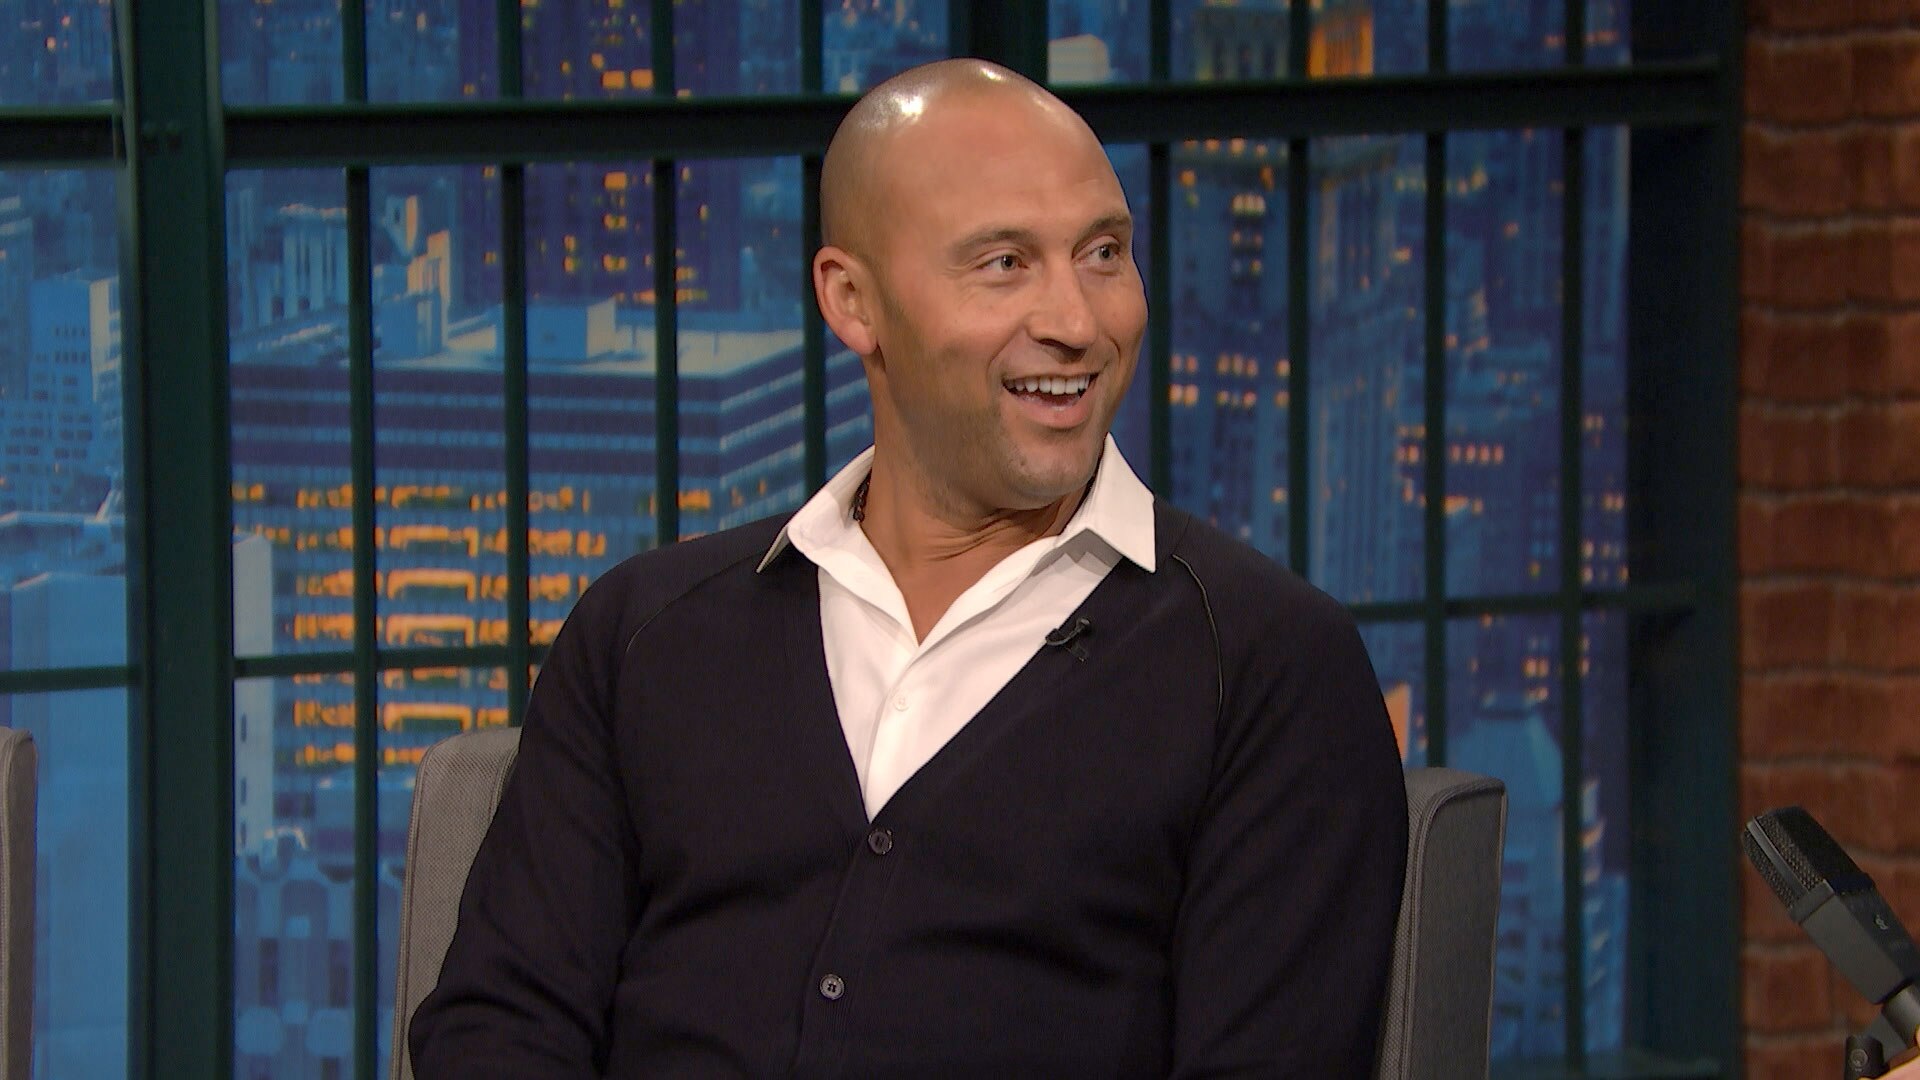 Watch Late Night With Seth Meyers Interview Derek Jeter And Seth Remember Performing Derek